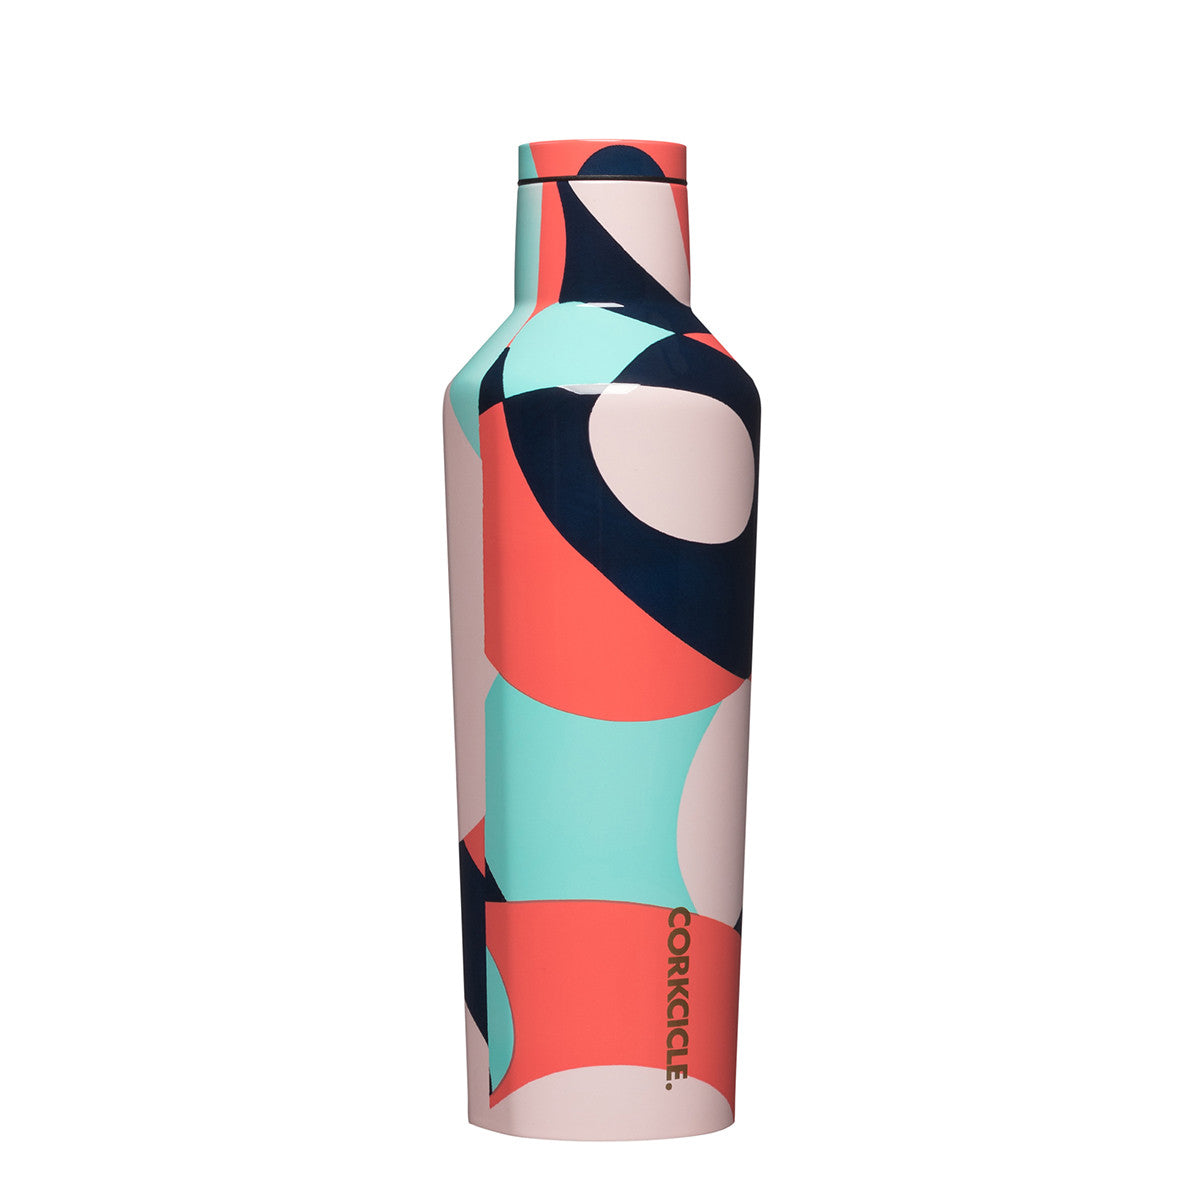 Corkcicle Mod Canteen 475ml - Shout Insulated Stainless Steel Drink Bottle